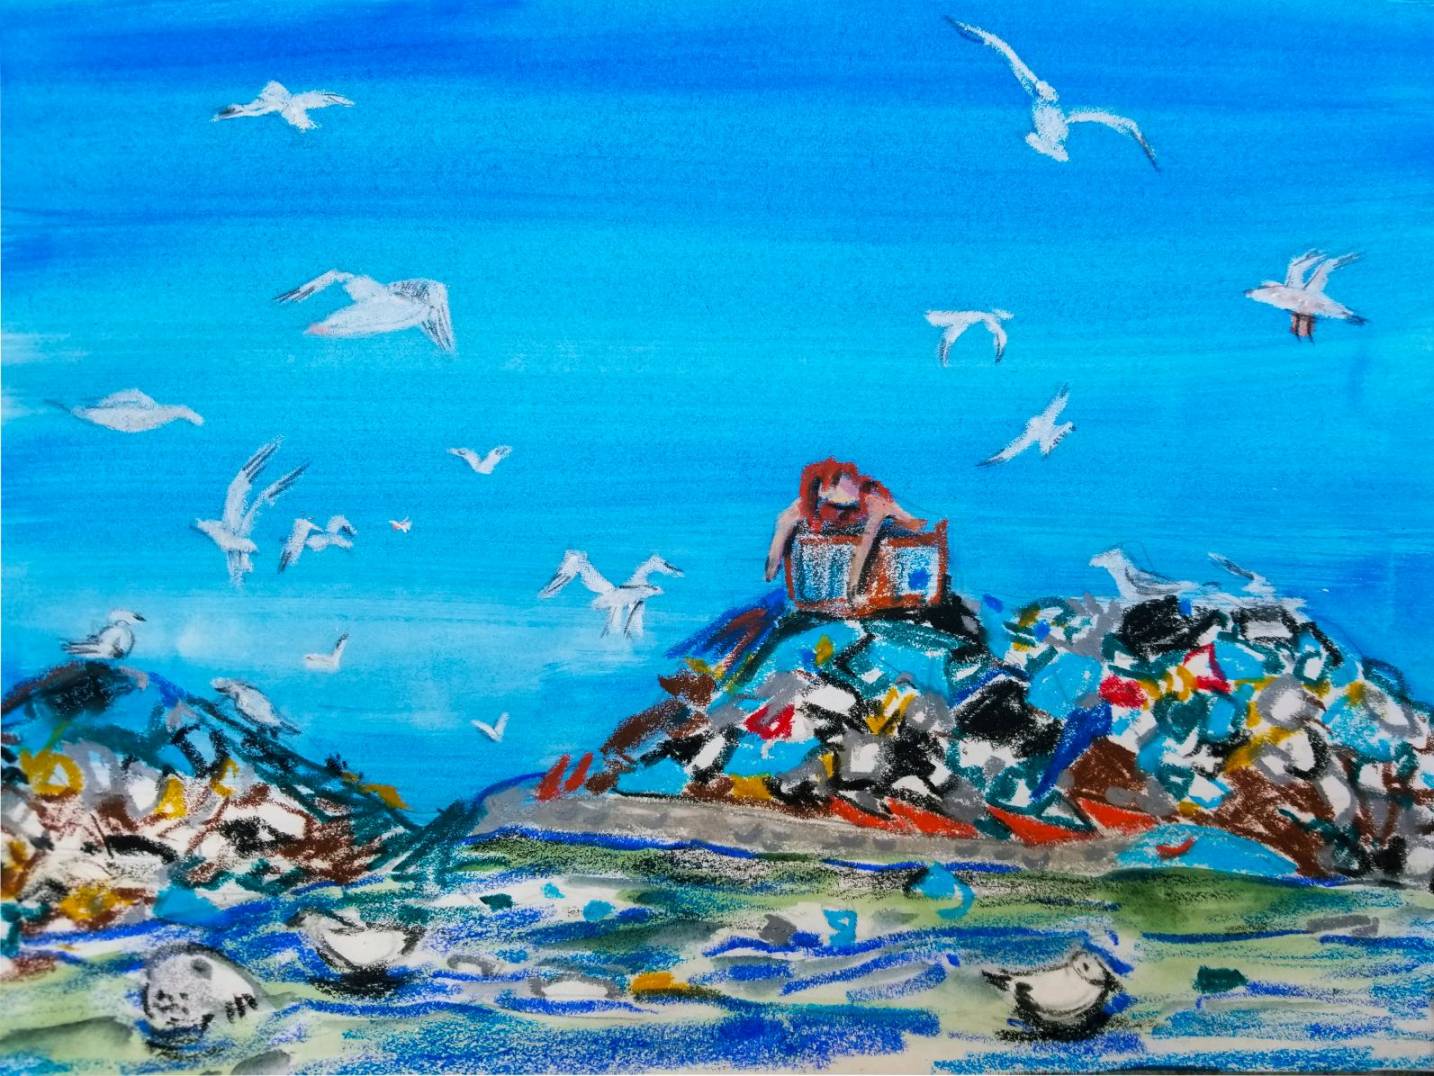 zoom out of the mermaid napping on a trash heap